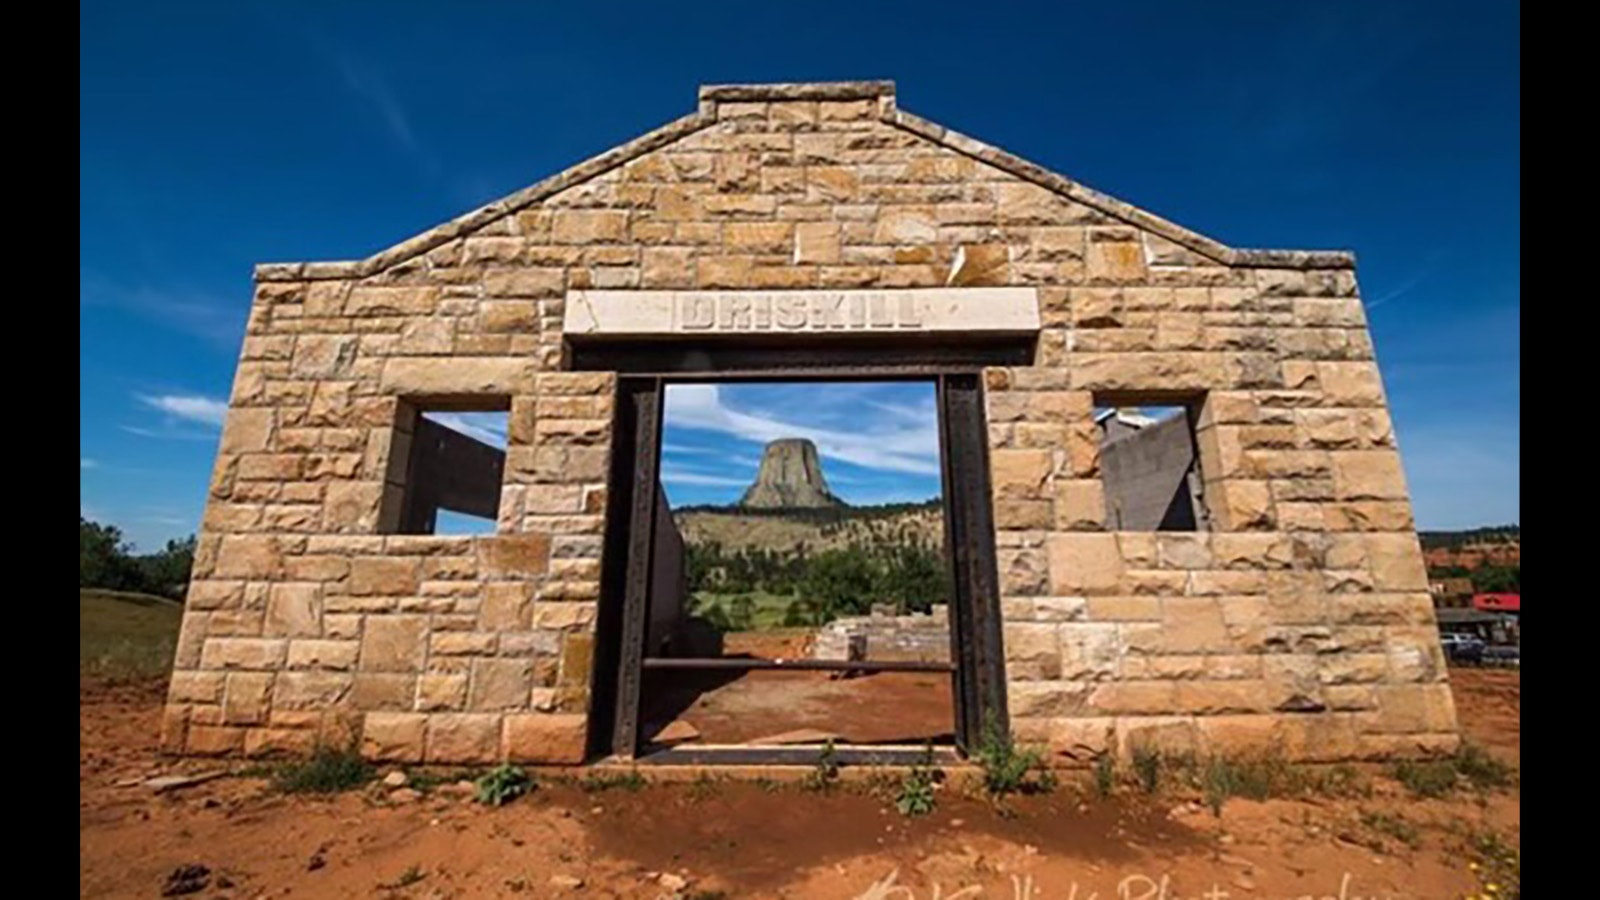 Ogden Drisill reassembled the old sandstone mill on his property, with a new stone addition over the door frame.